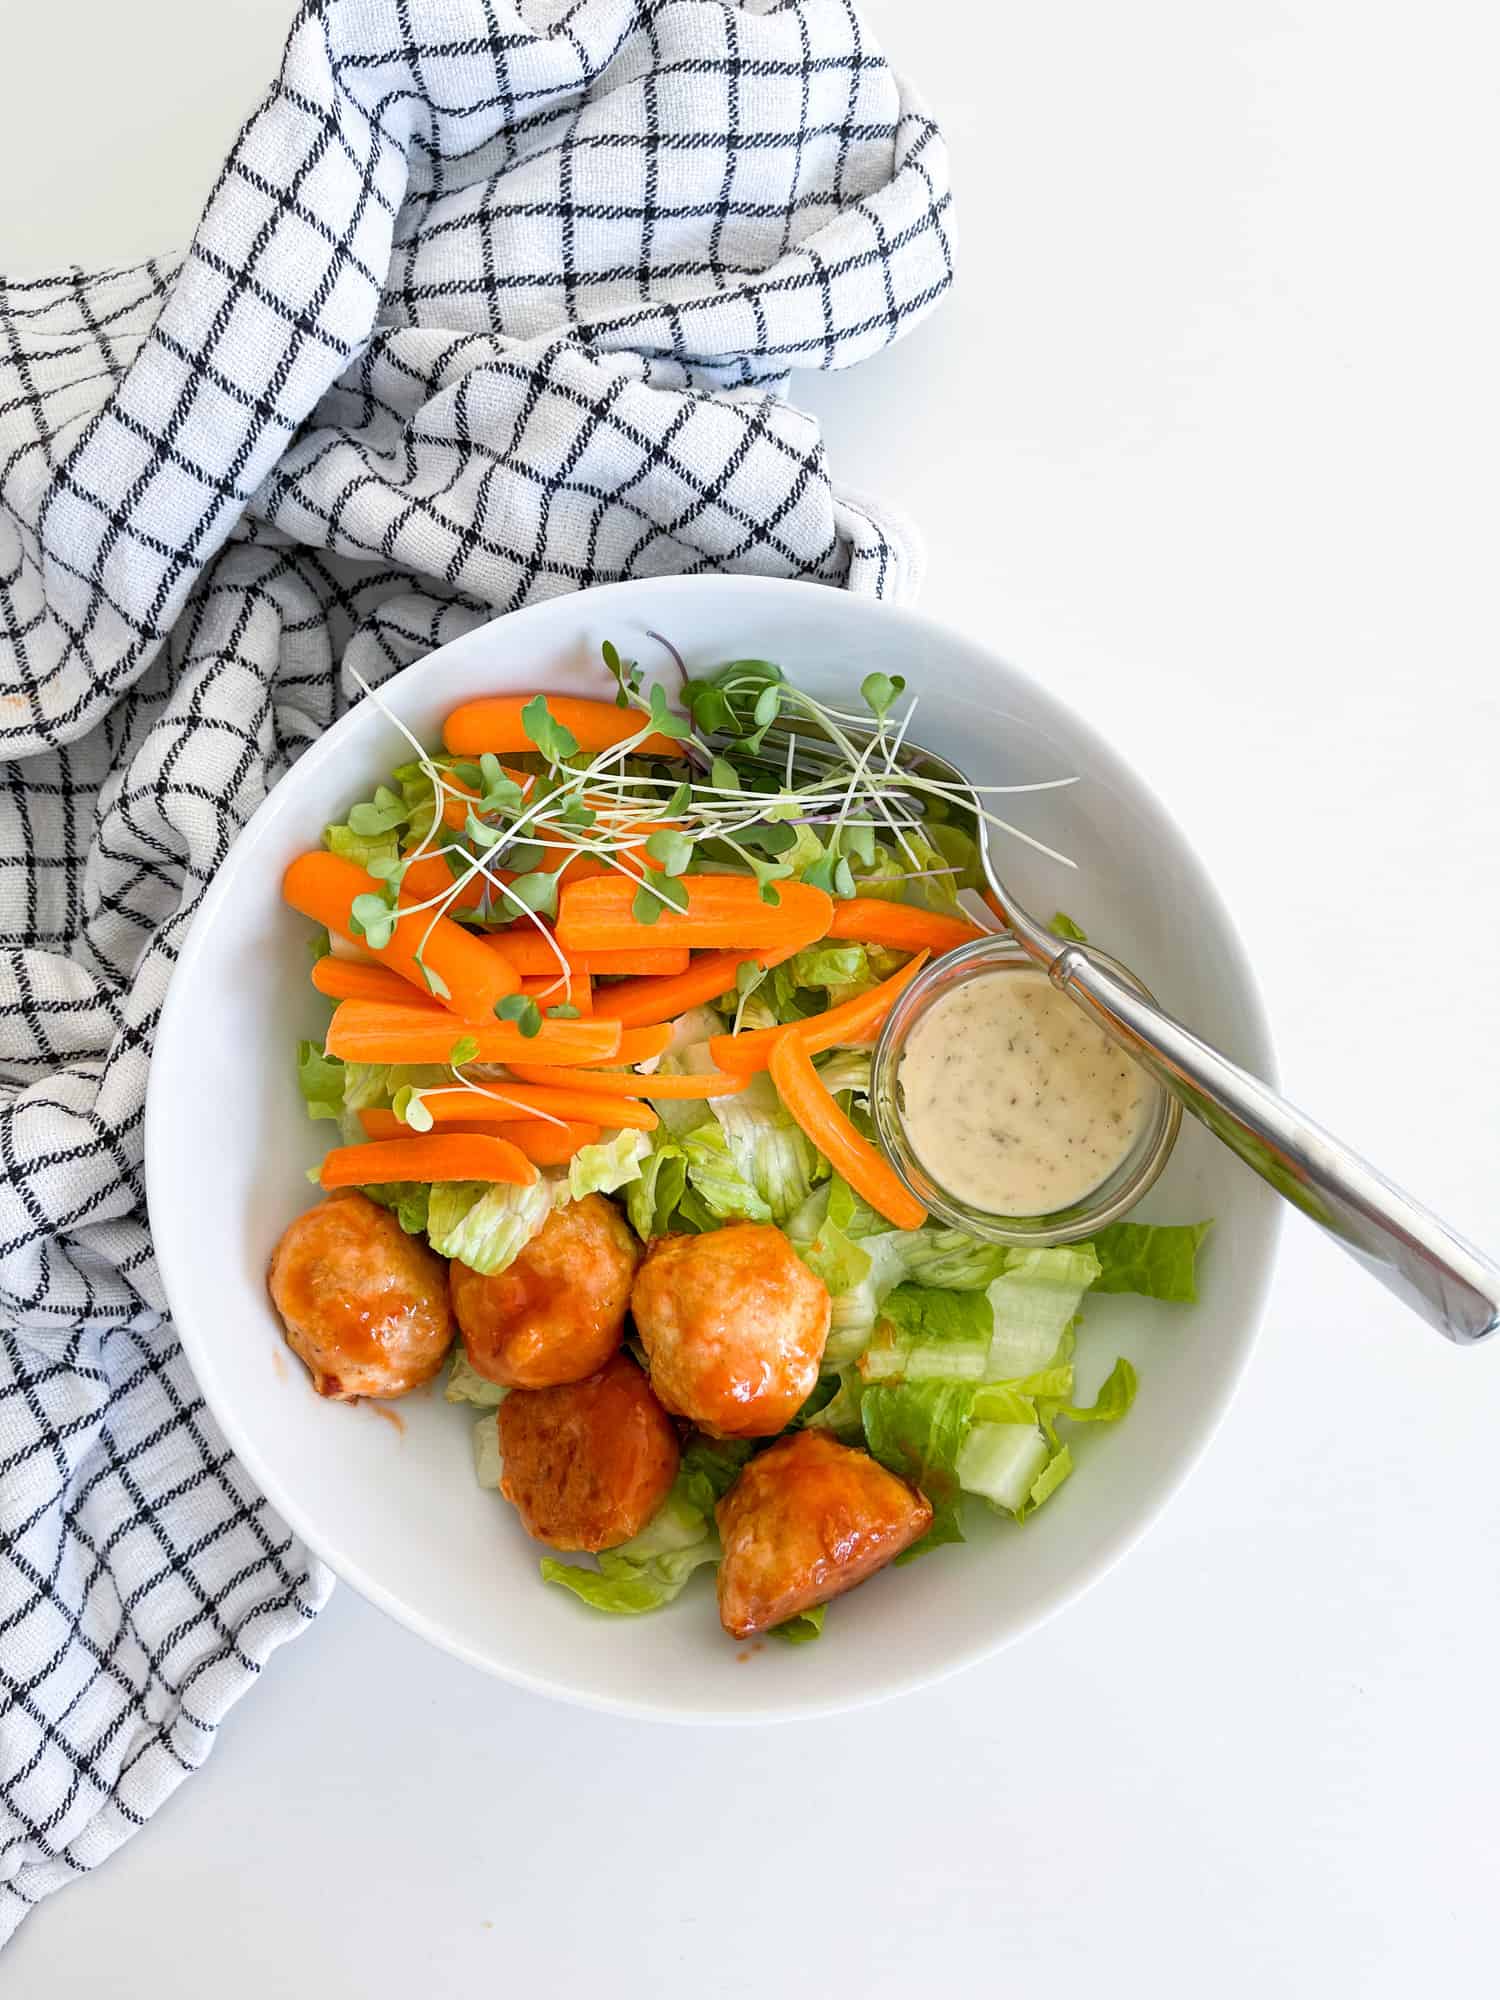 baked chicken meatballs in a white bowl on top of greens for a salad